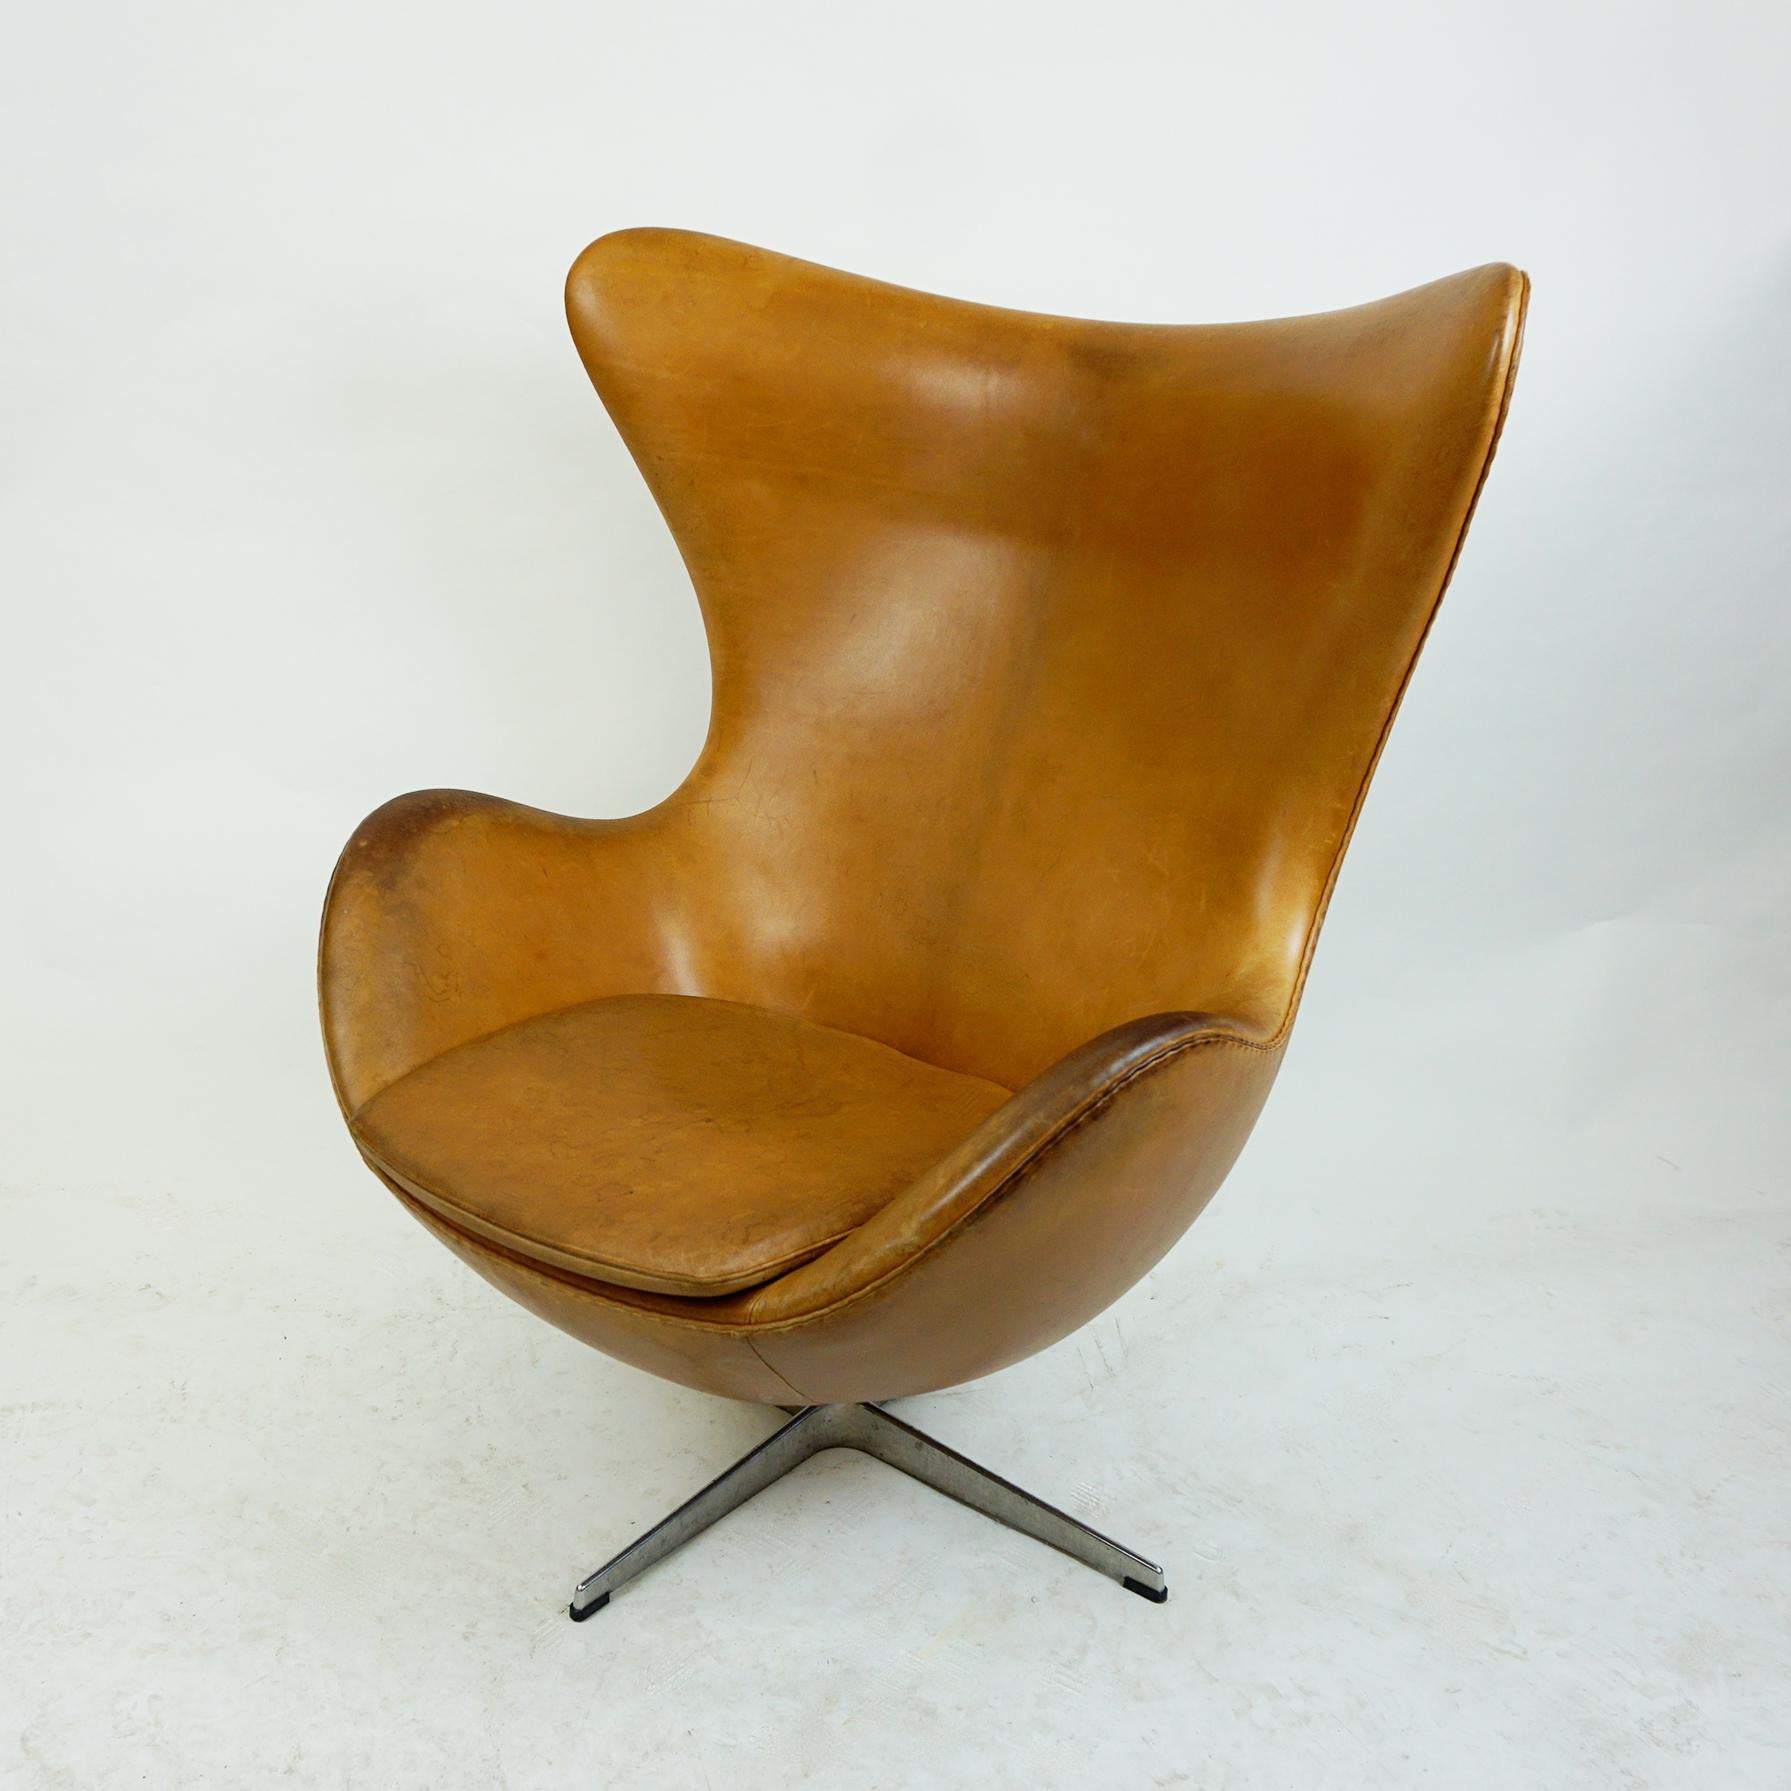 Mid-20th Century Cognac Leather Egg Chair, Mod. 3317 by Arne Jacobsen for Fritz Hansen